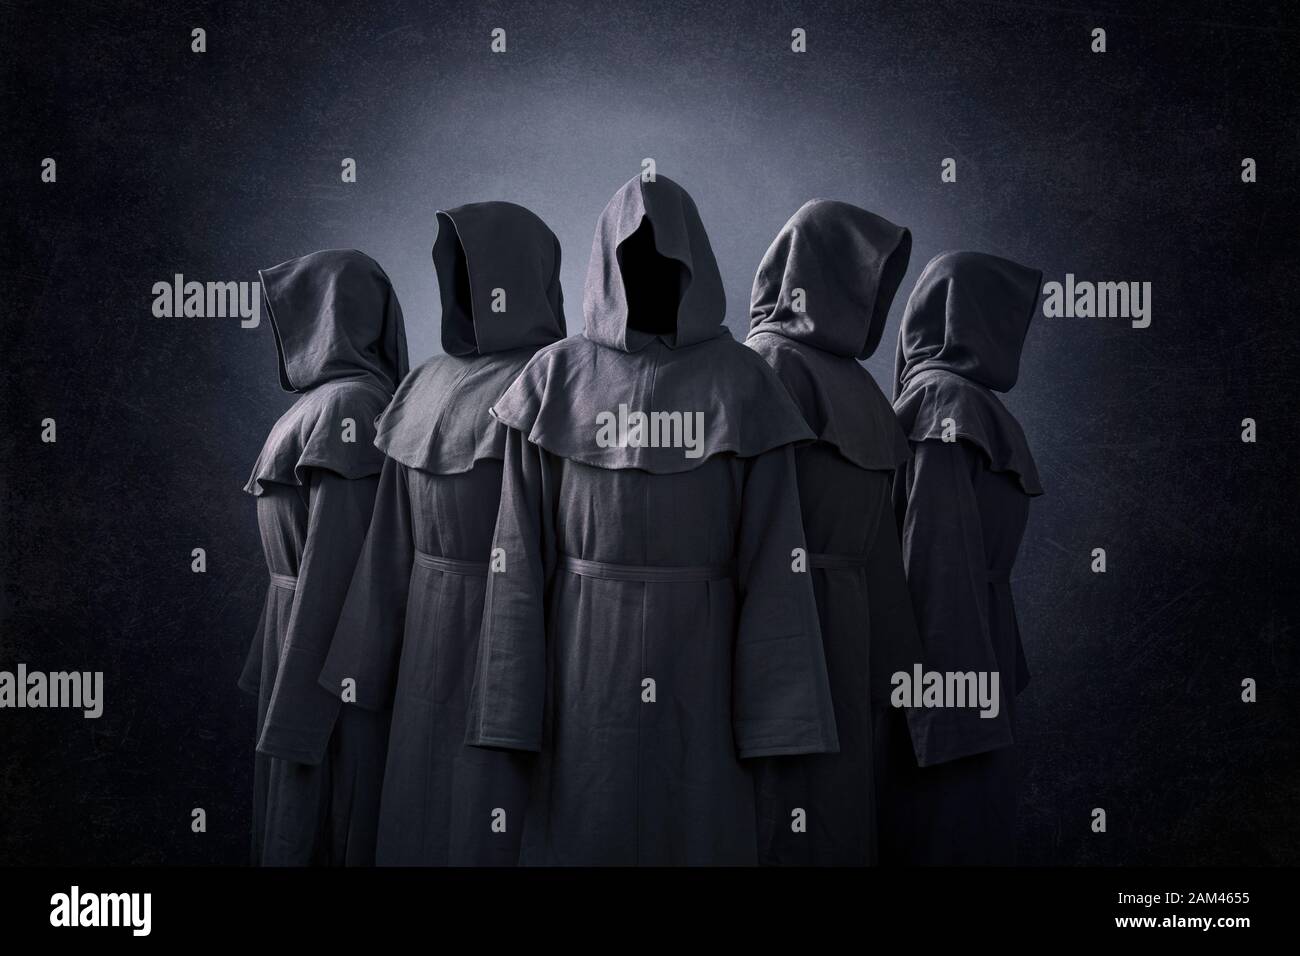 Group of five scary figures in hooded cloaks in the dark Stock Photo